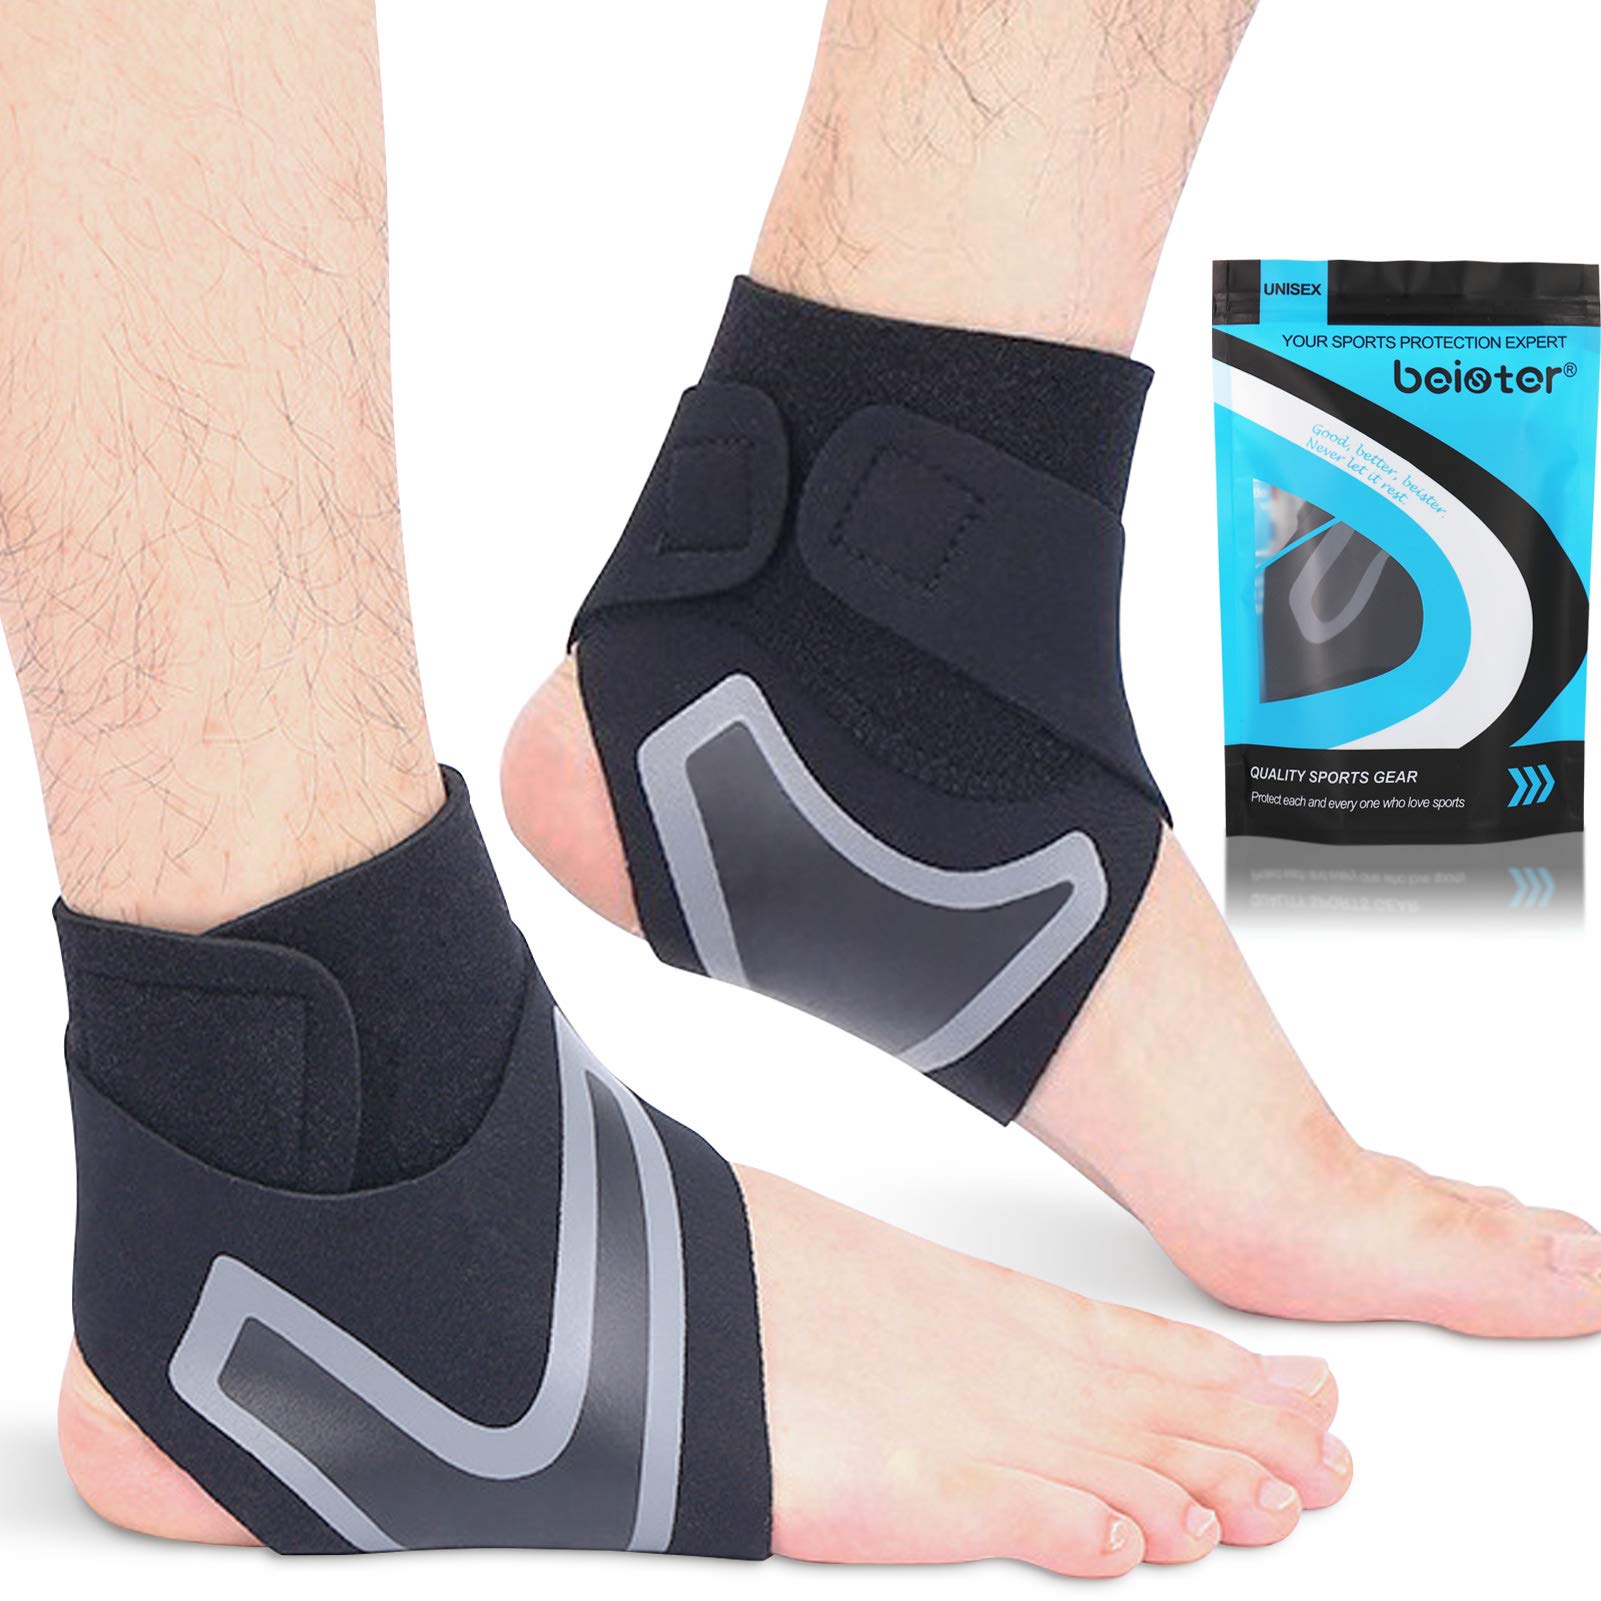 Protective Ankle Support - Protection & Pain Relief